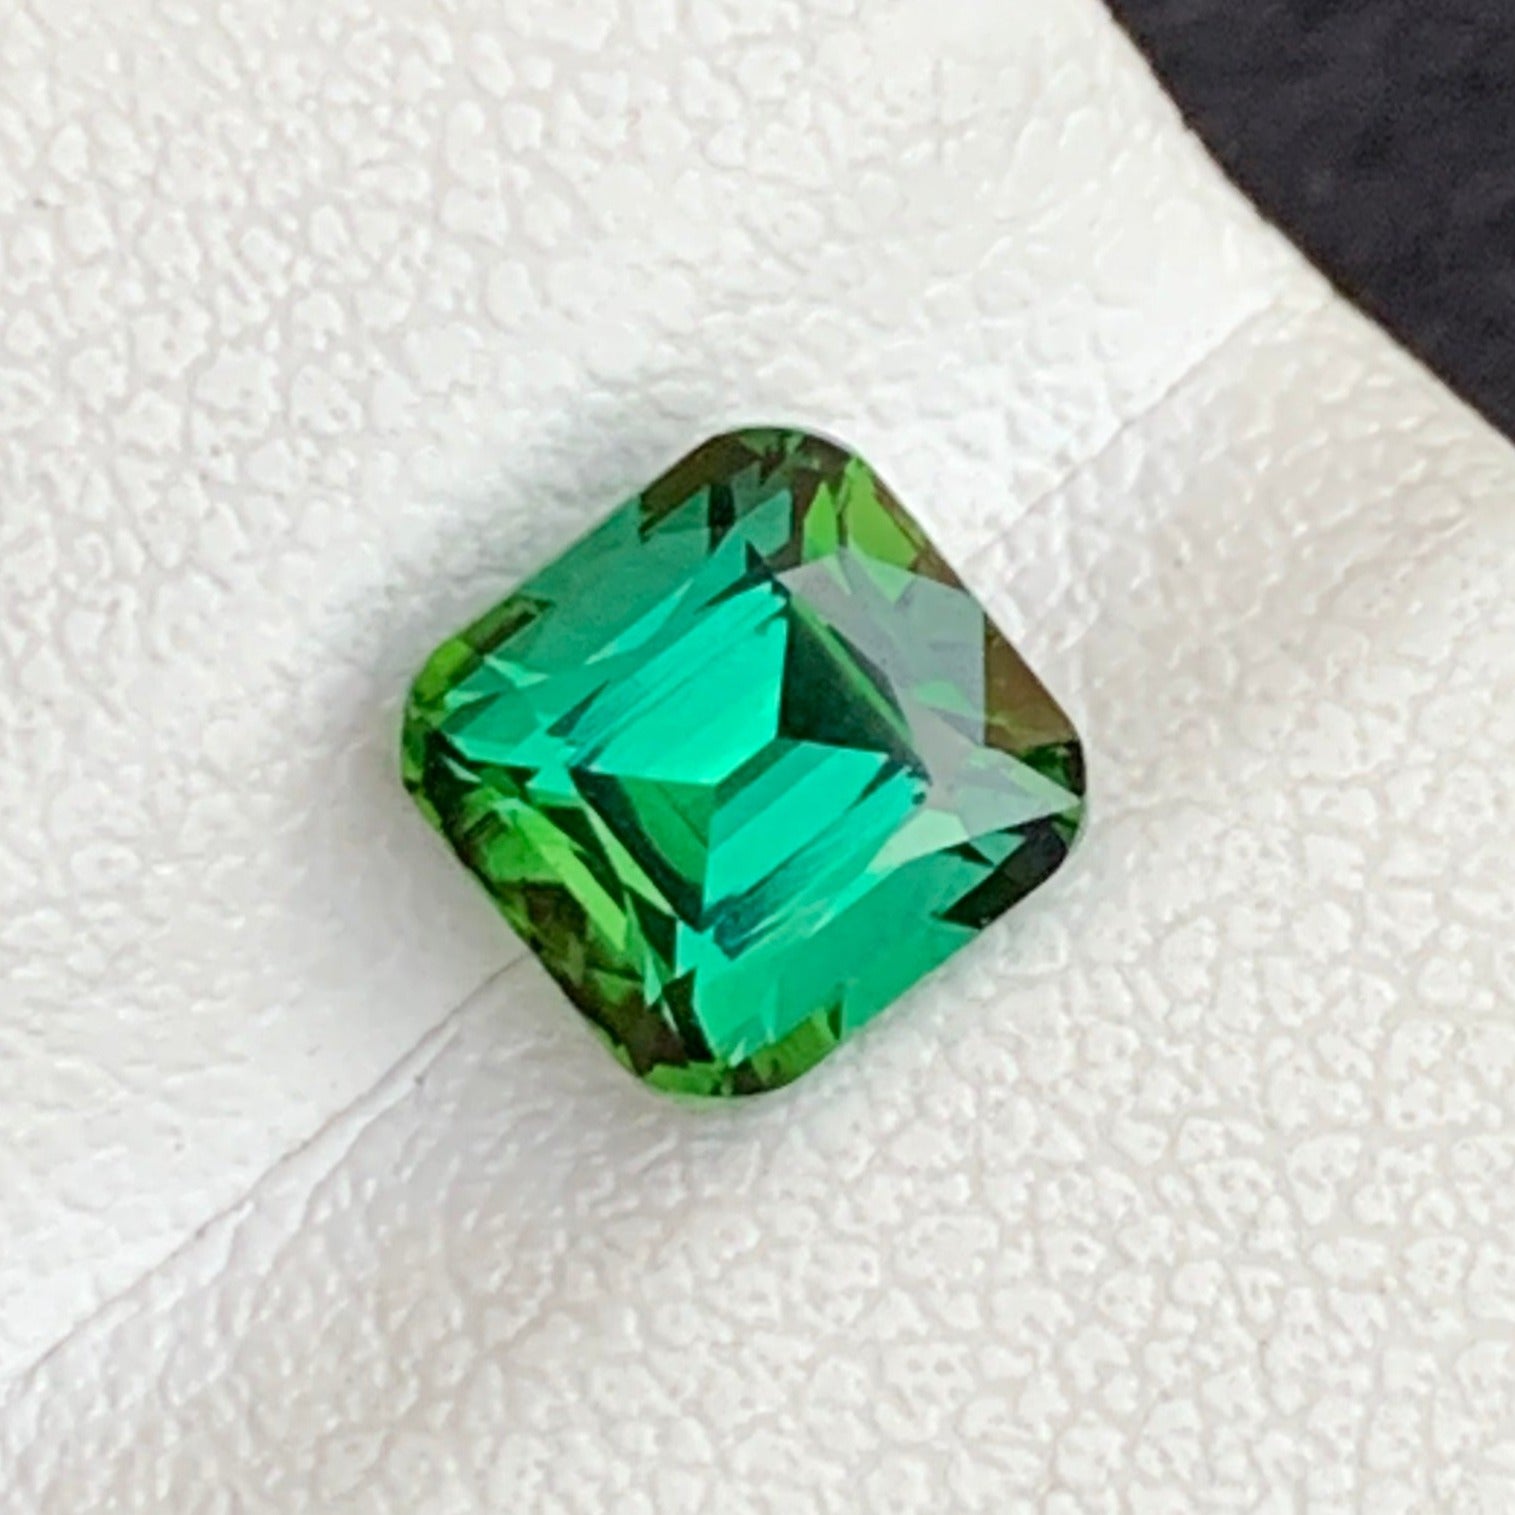 Loose forest green tourmaline